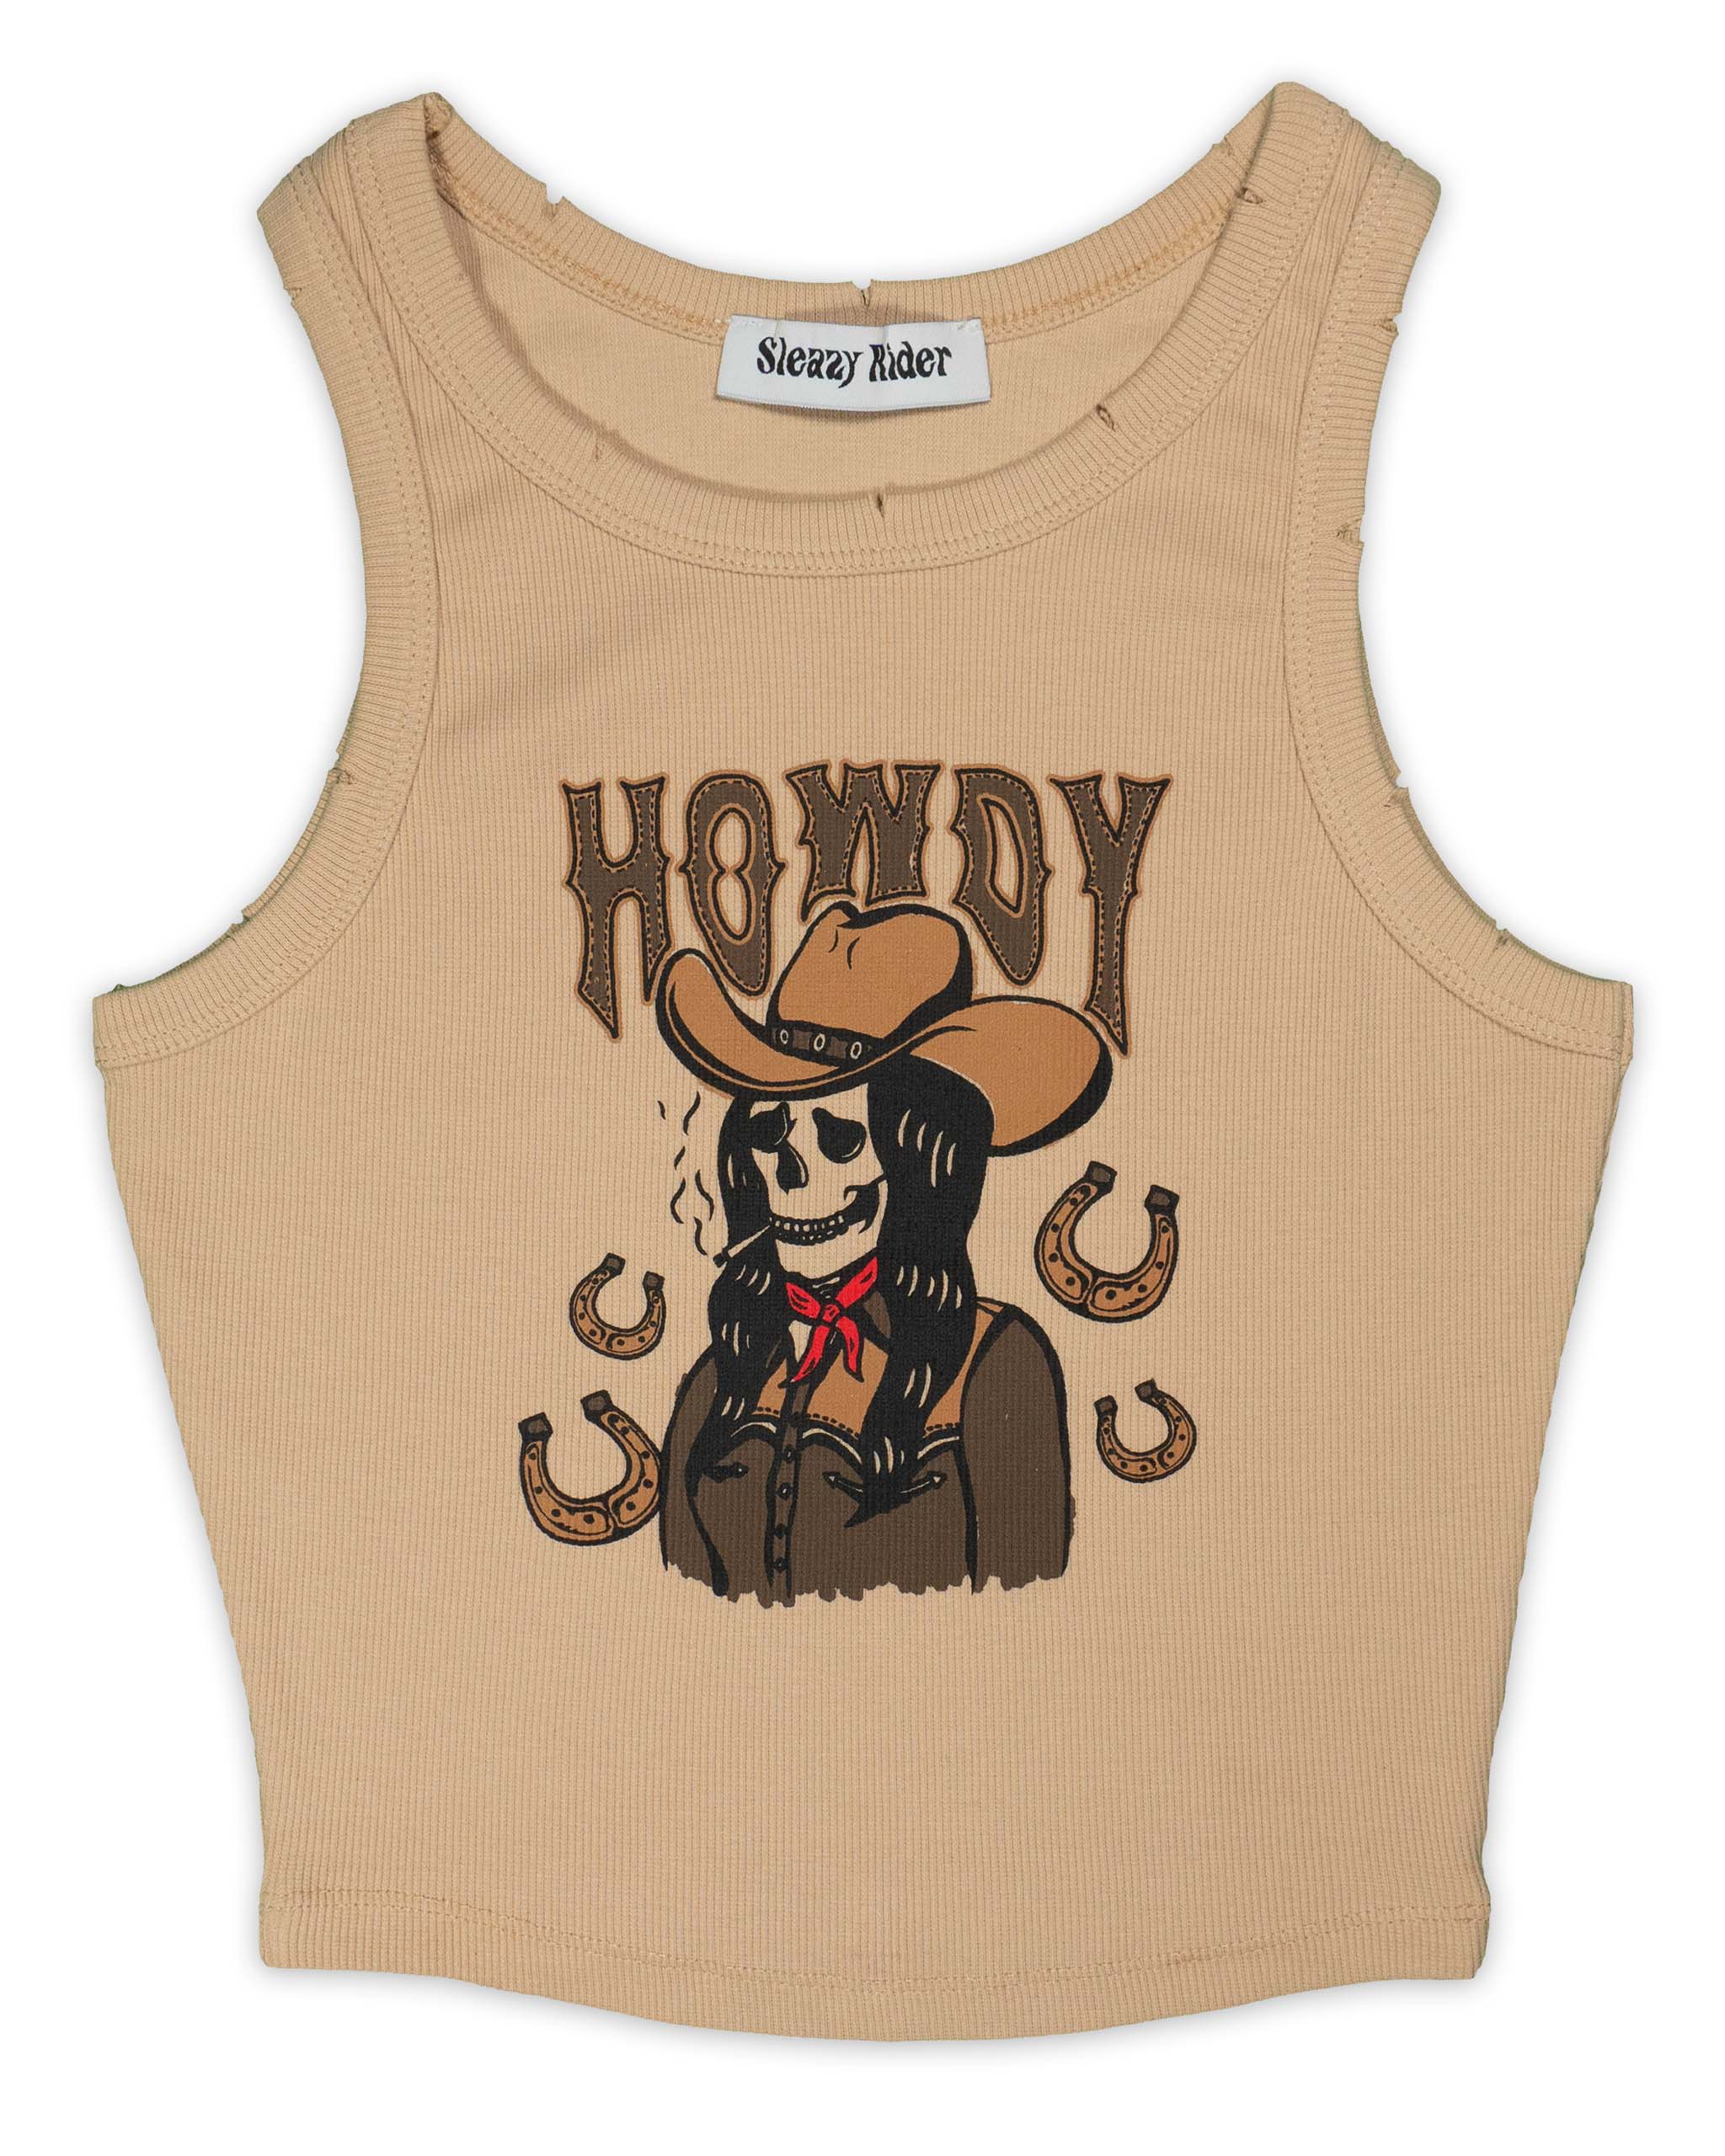 Howdy tank top by Sleazy Rider